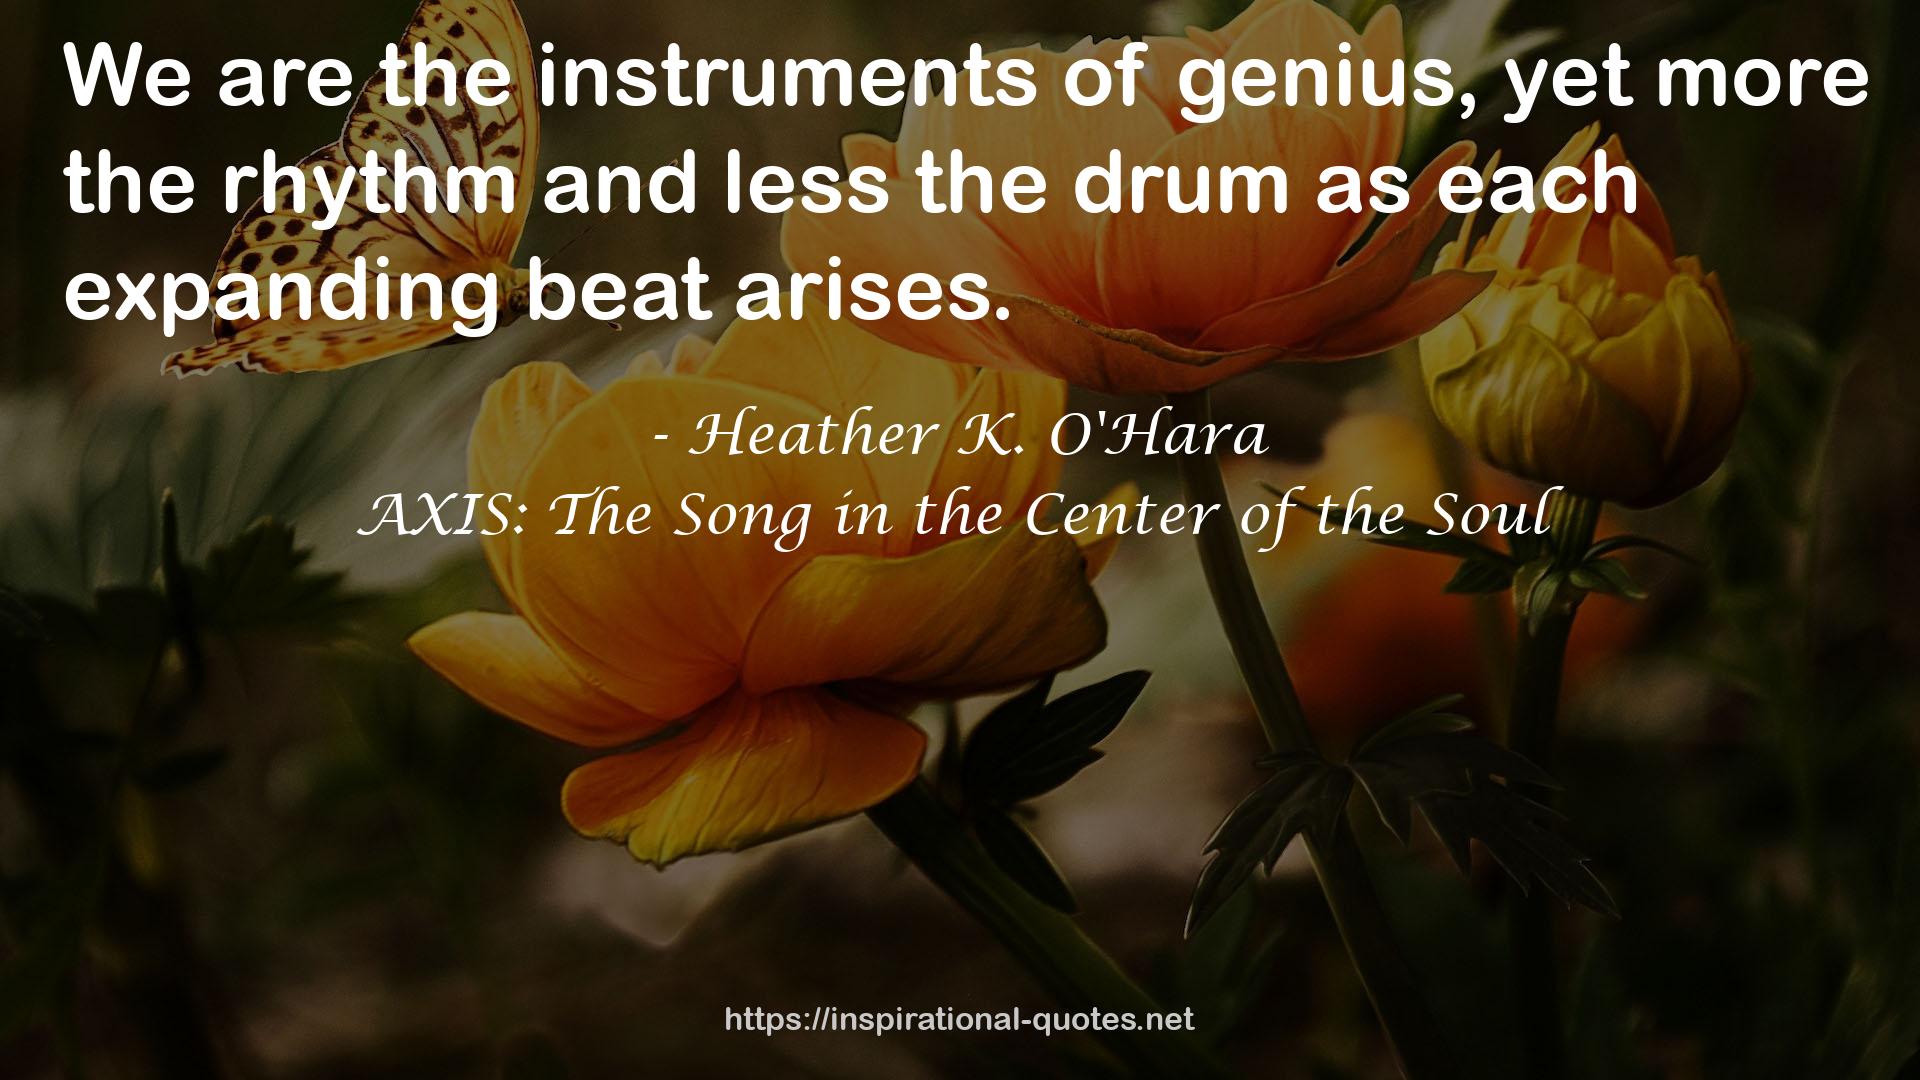 AXIS: The Song in the Center of the Soul QUOTES